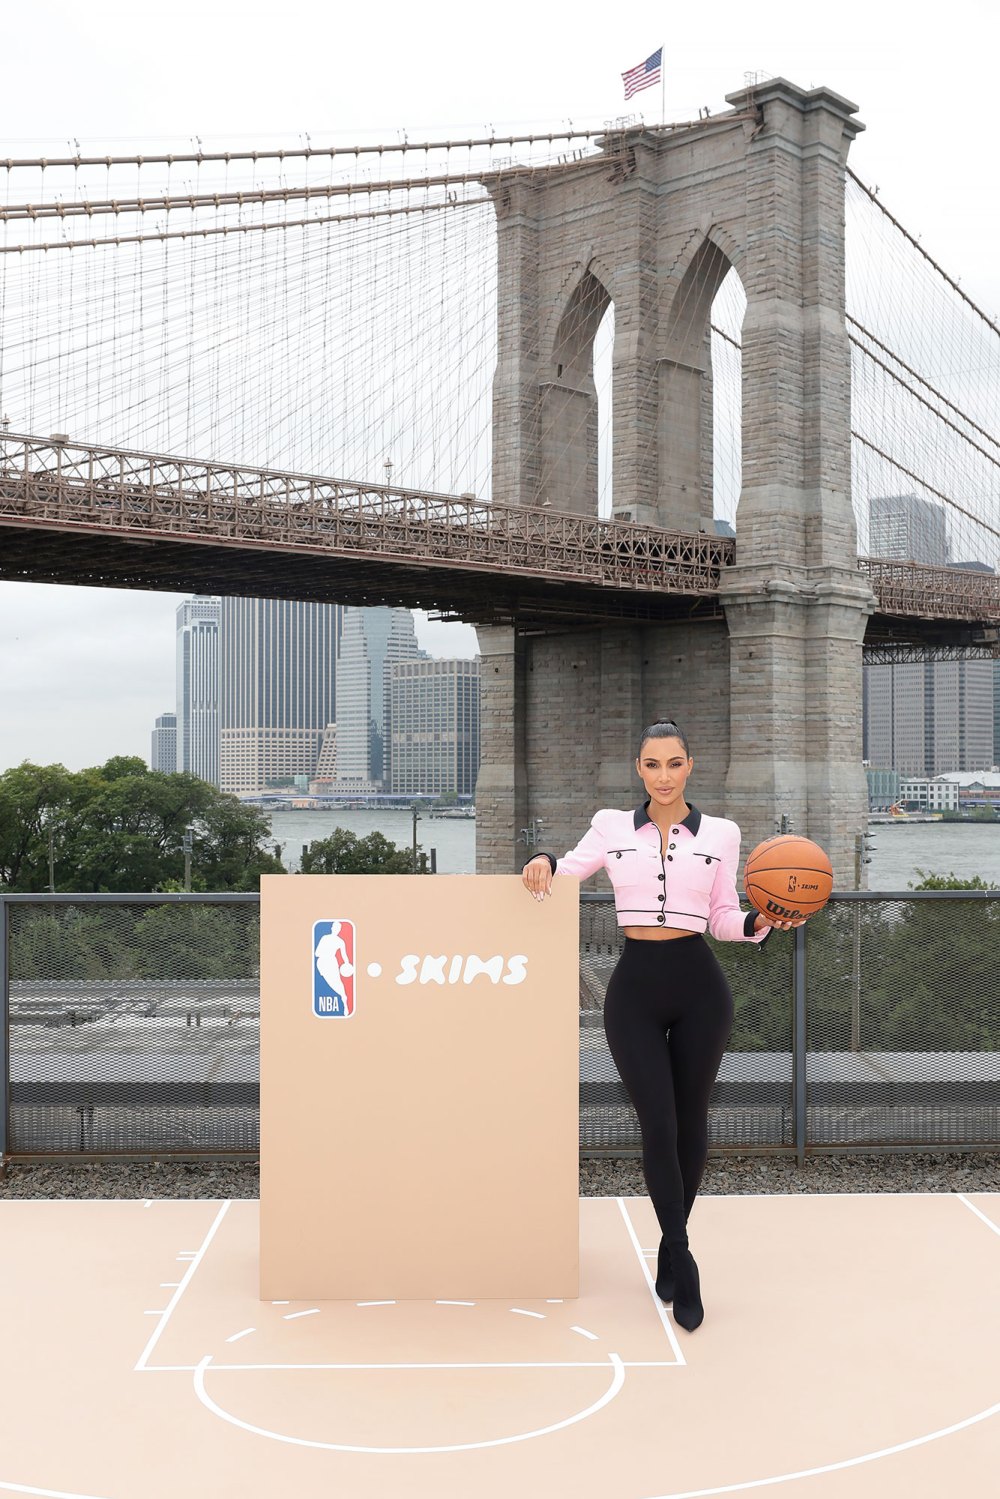 Skims Is the Official Underwear Partner of the NBA and WNBA